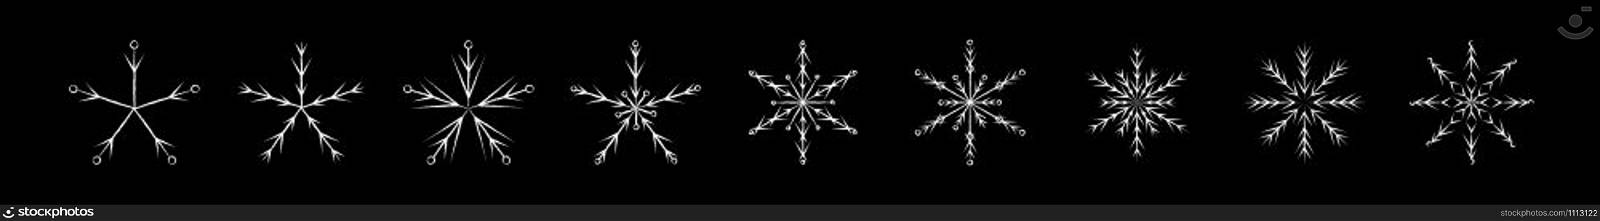 Frozen snowflake symbol collection vector illustration. Chalk style line white snowflakes isolated on blackboard for abstract christmas celebration design or winter season decoration ornament. Chalked frozen snowflake symbol vector collection